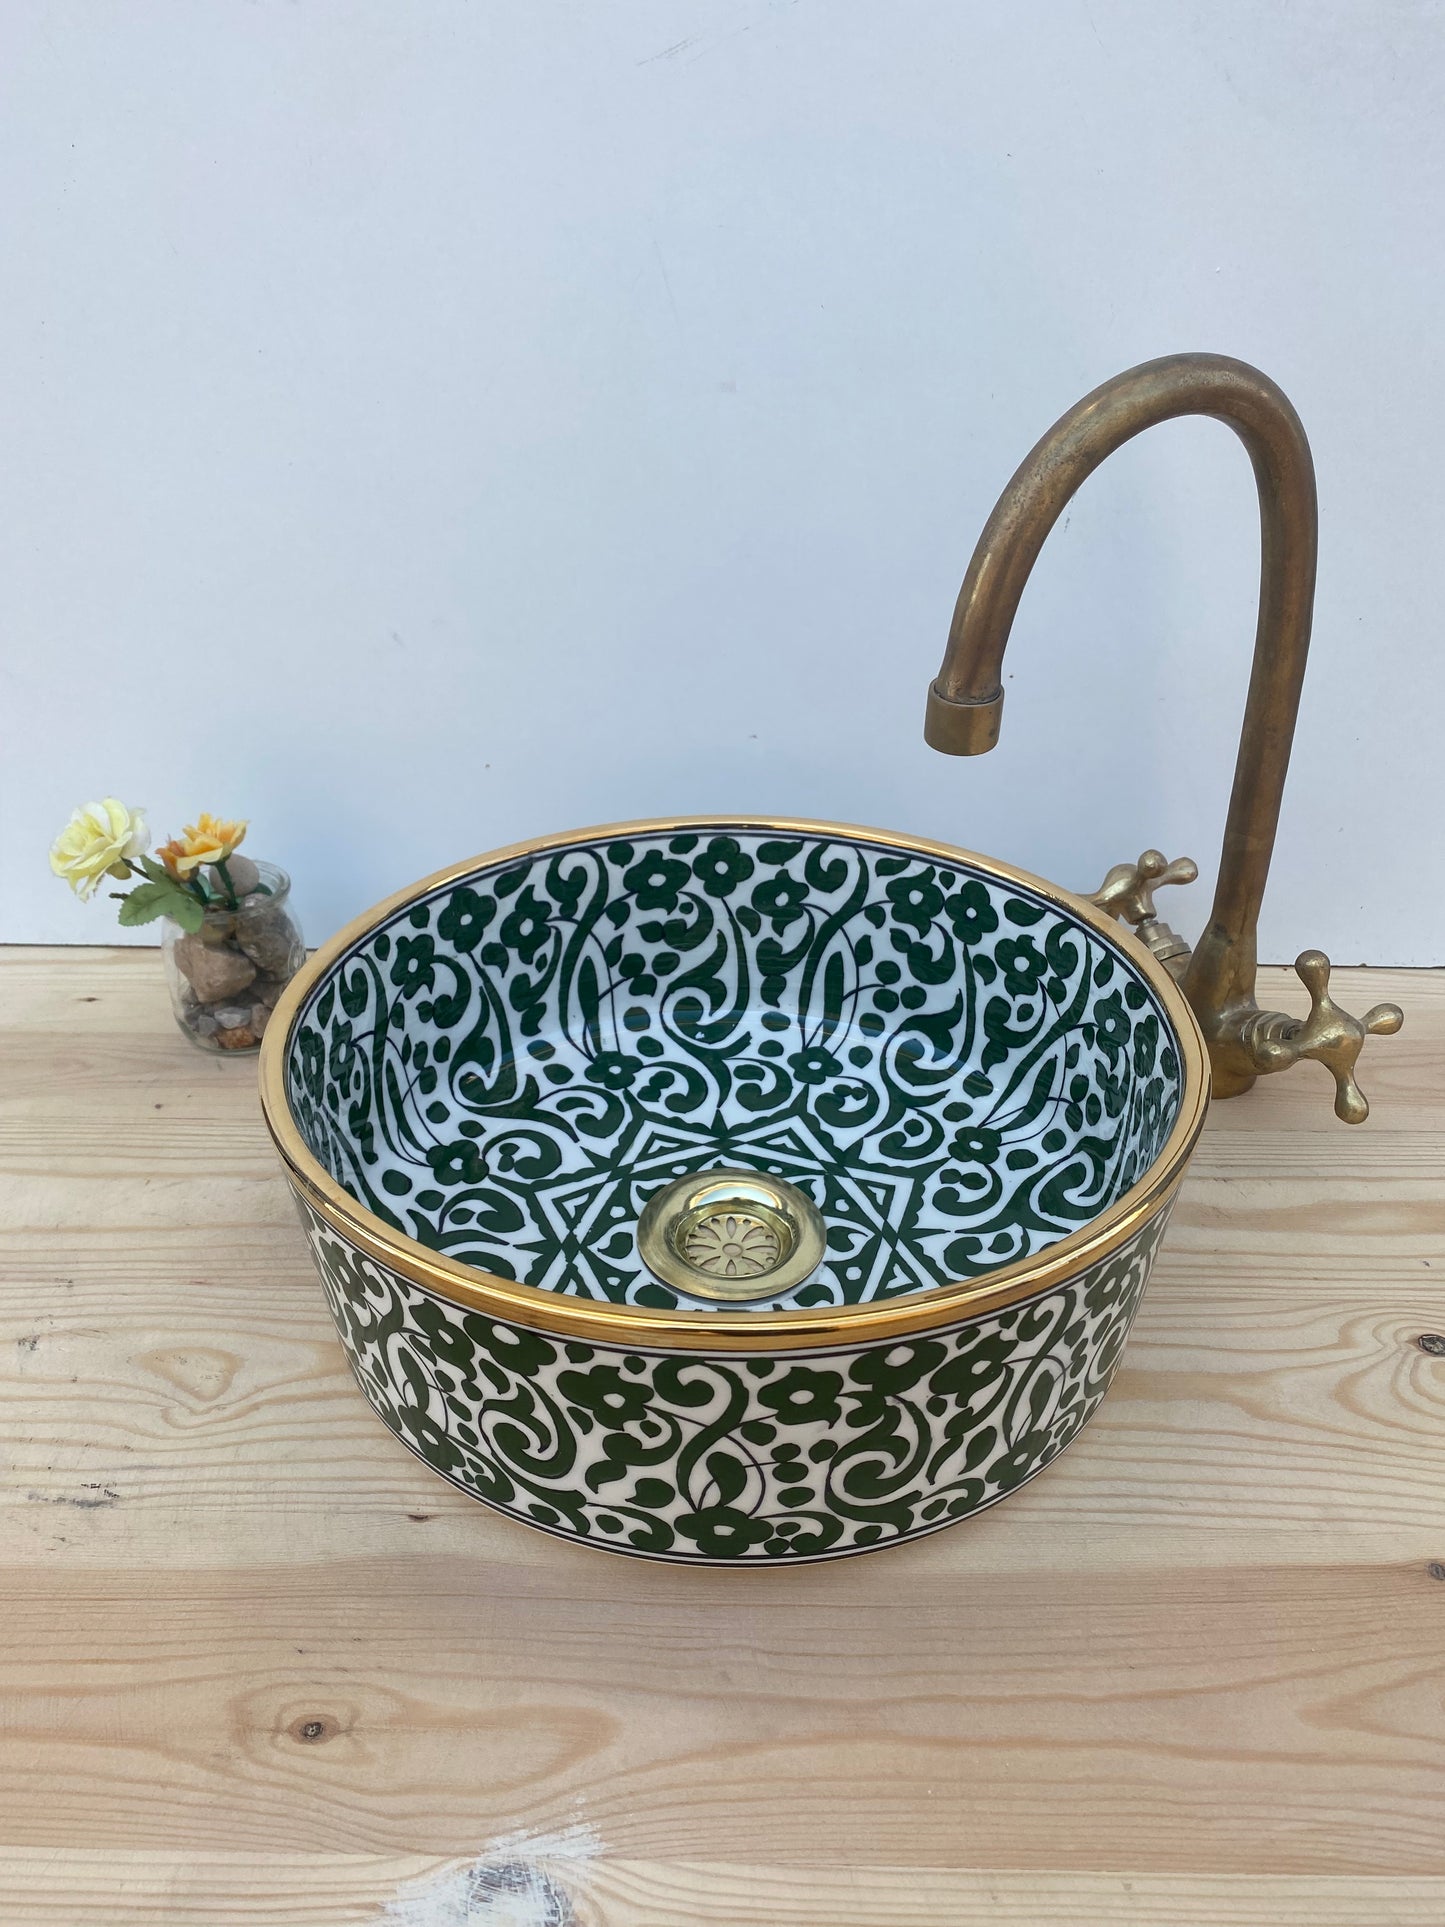 14k gold Green Bathroom vessel sink made from ceramic 100% handmade hand painted, ceramic sink decor built with mid century modern styling